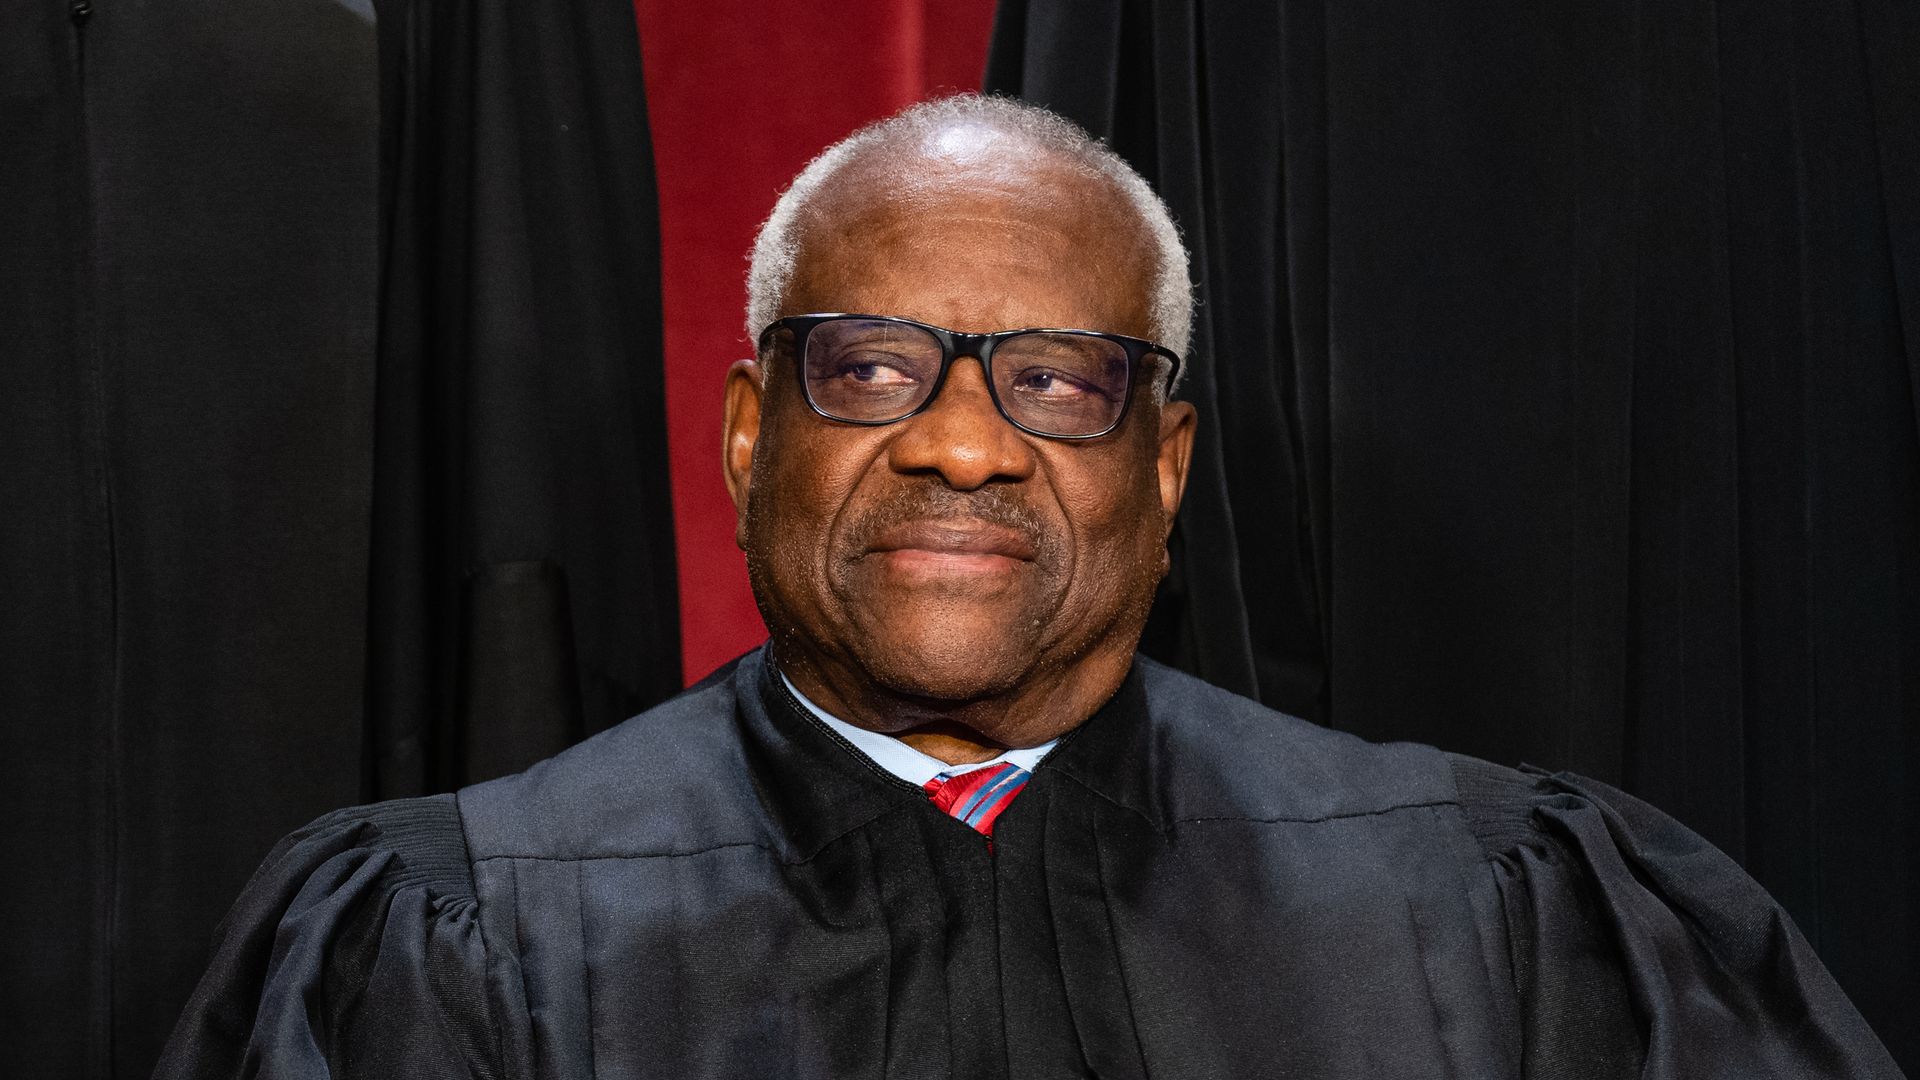 Clarence Thomas during the formal group photograph